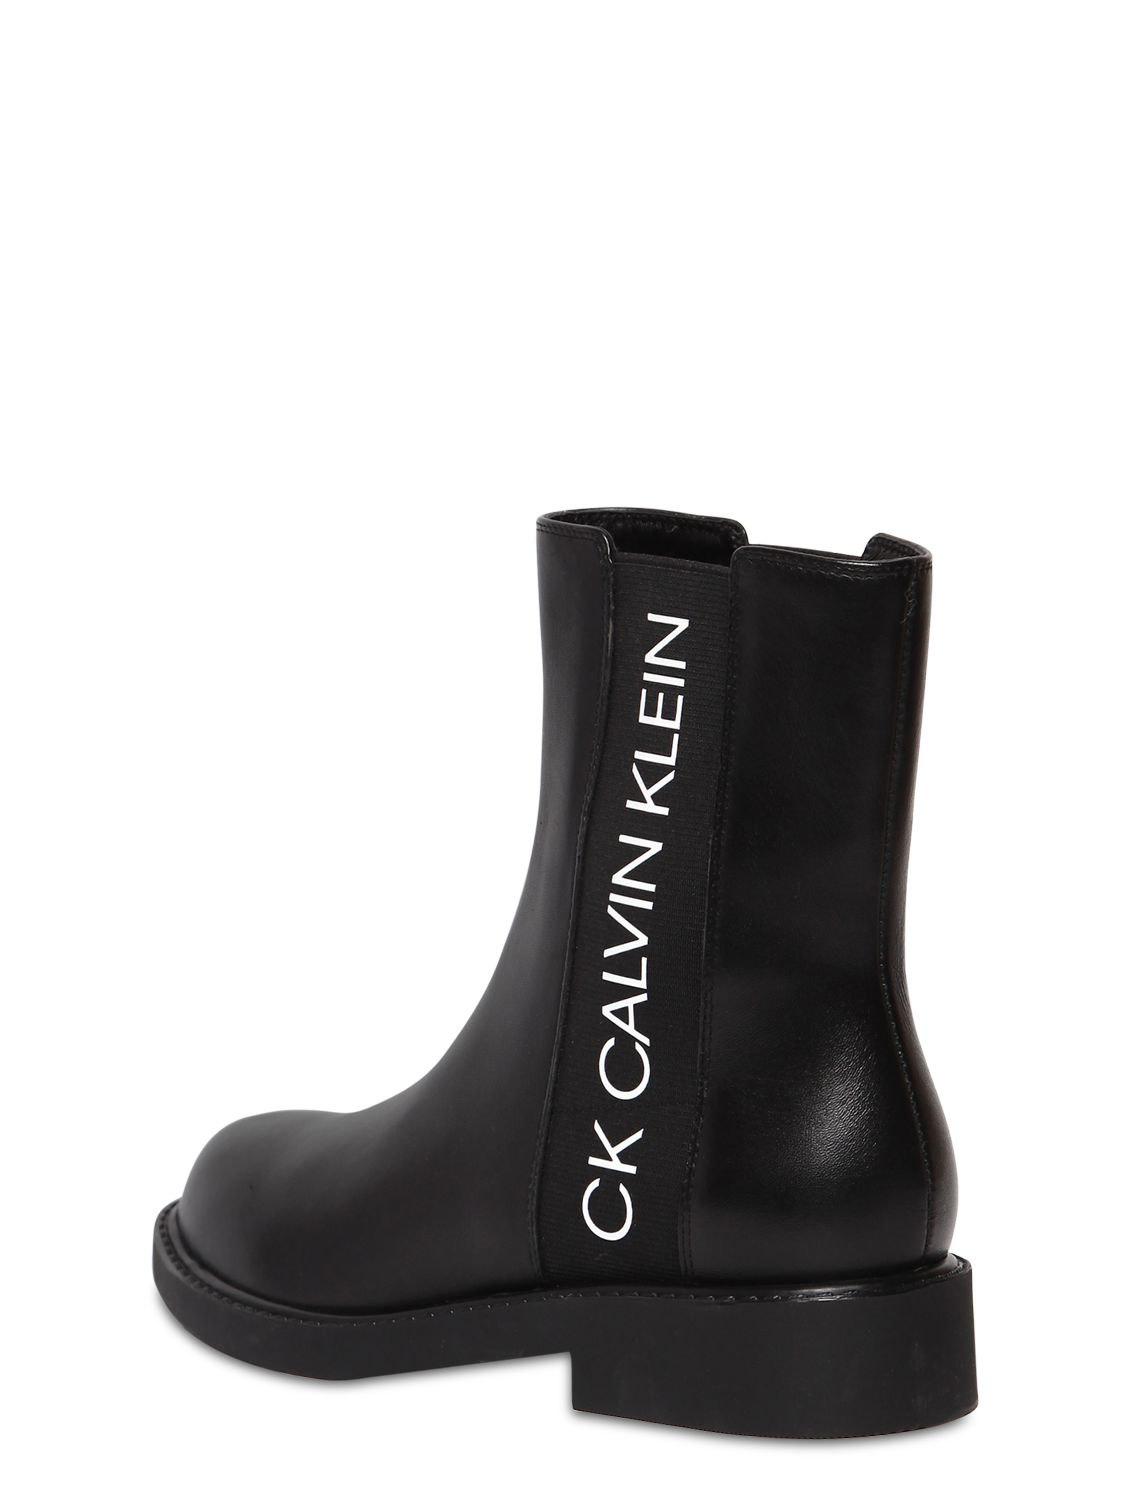 Calvin Klein 20mm Yoshi Leather Beatle Boots in Black - Lyst